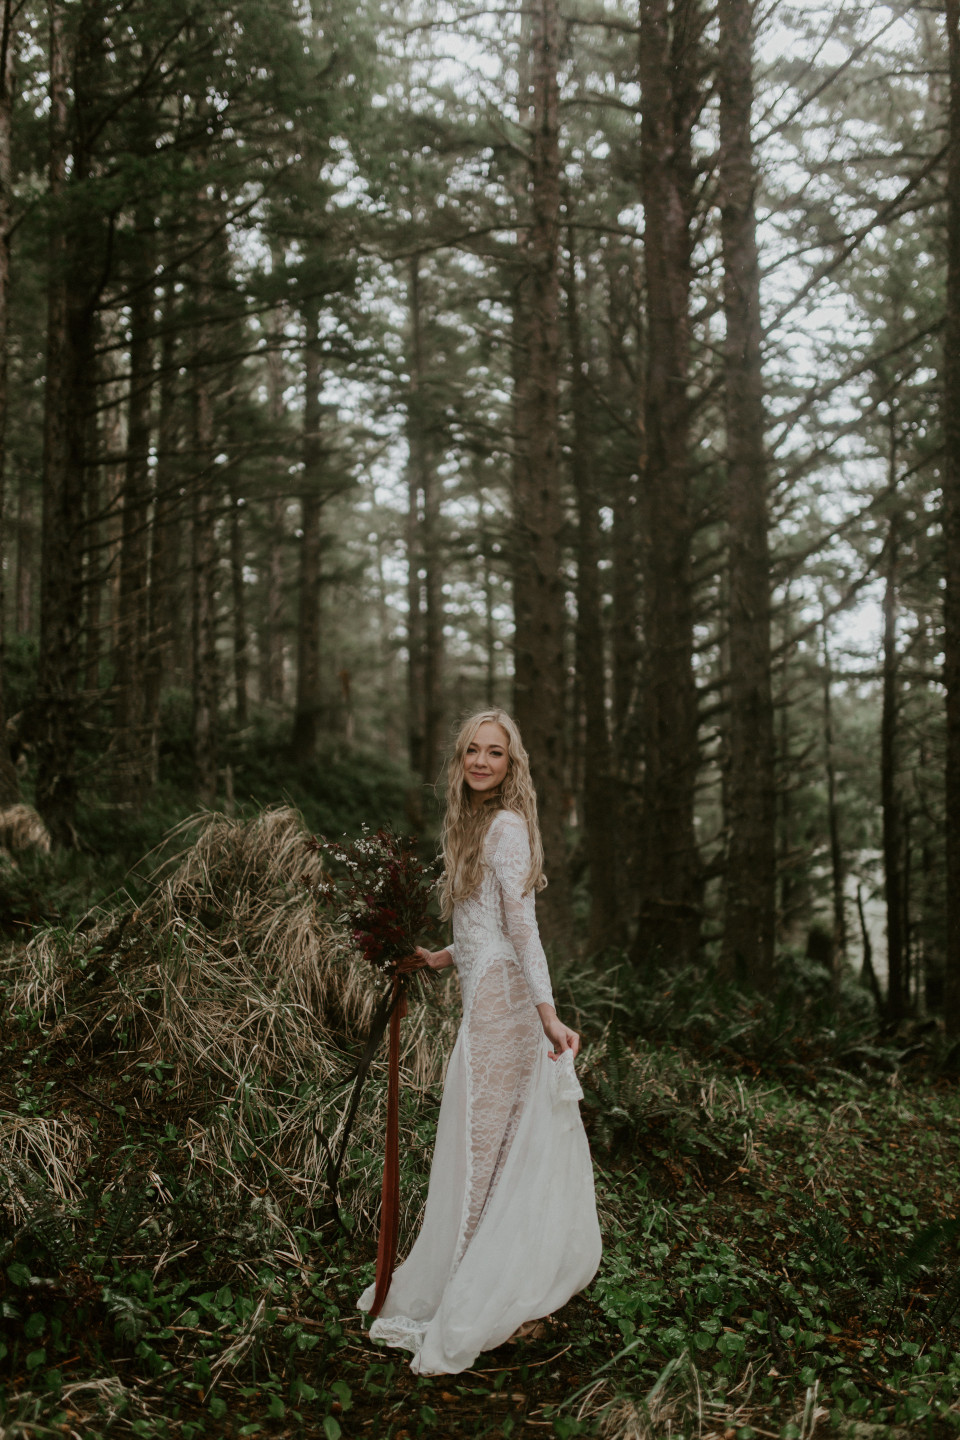 Hannah smiles for her picture among the trees at Cannon Beach, Oregon for her Oregon coast elopement. Wedding photography in Portland Oregon by Sienna Plus Josh.